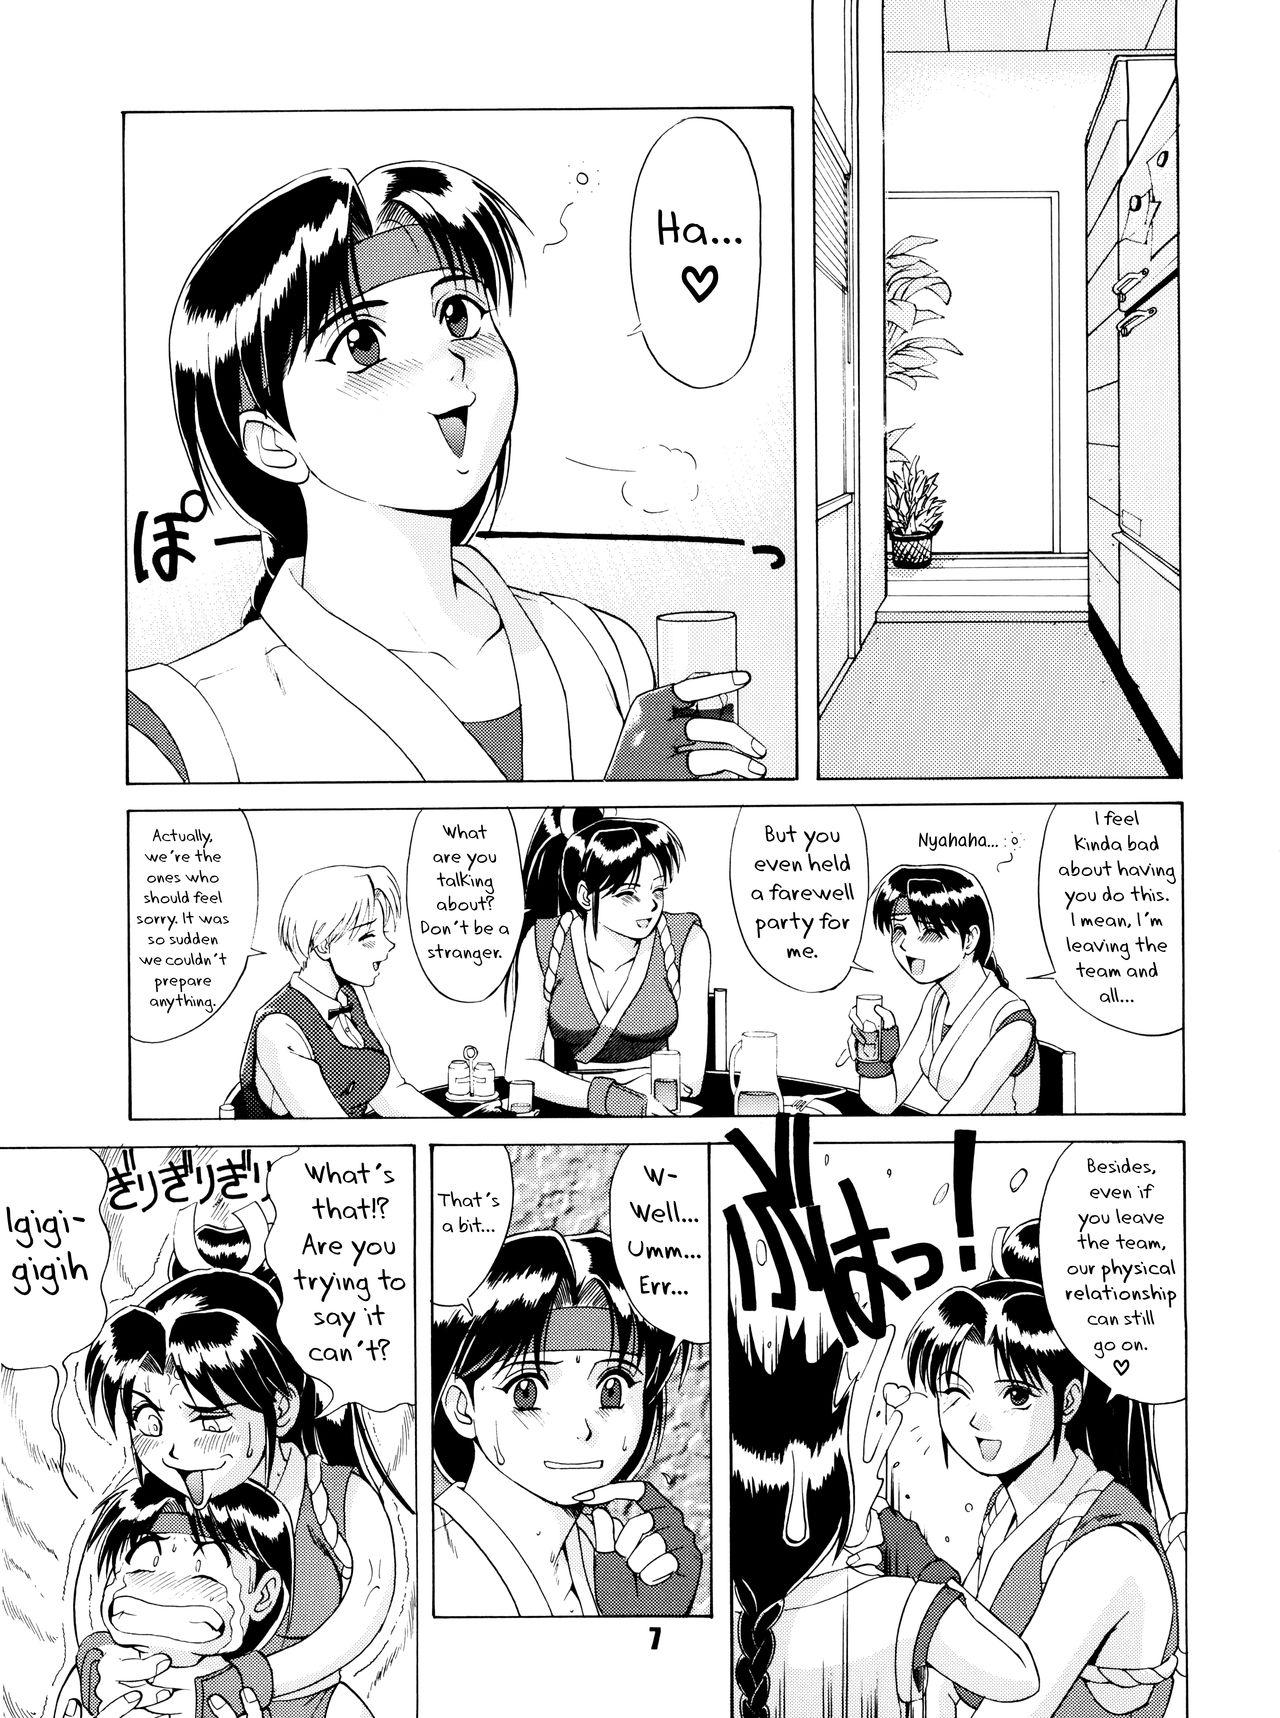 Women Sucking Dick The Yuri & Friends '96 - King of fighters Amigos - Page 6